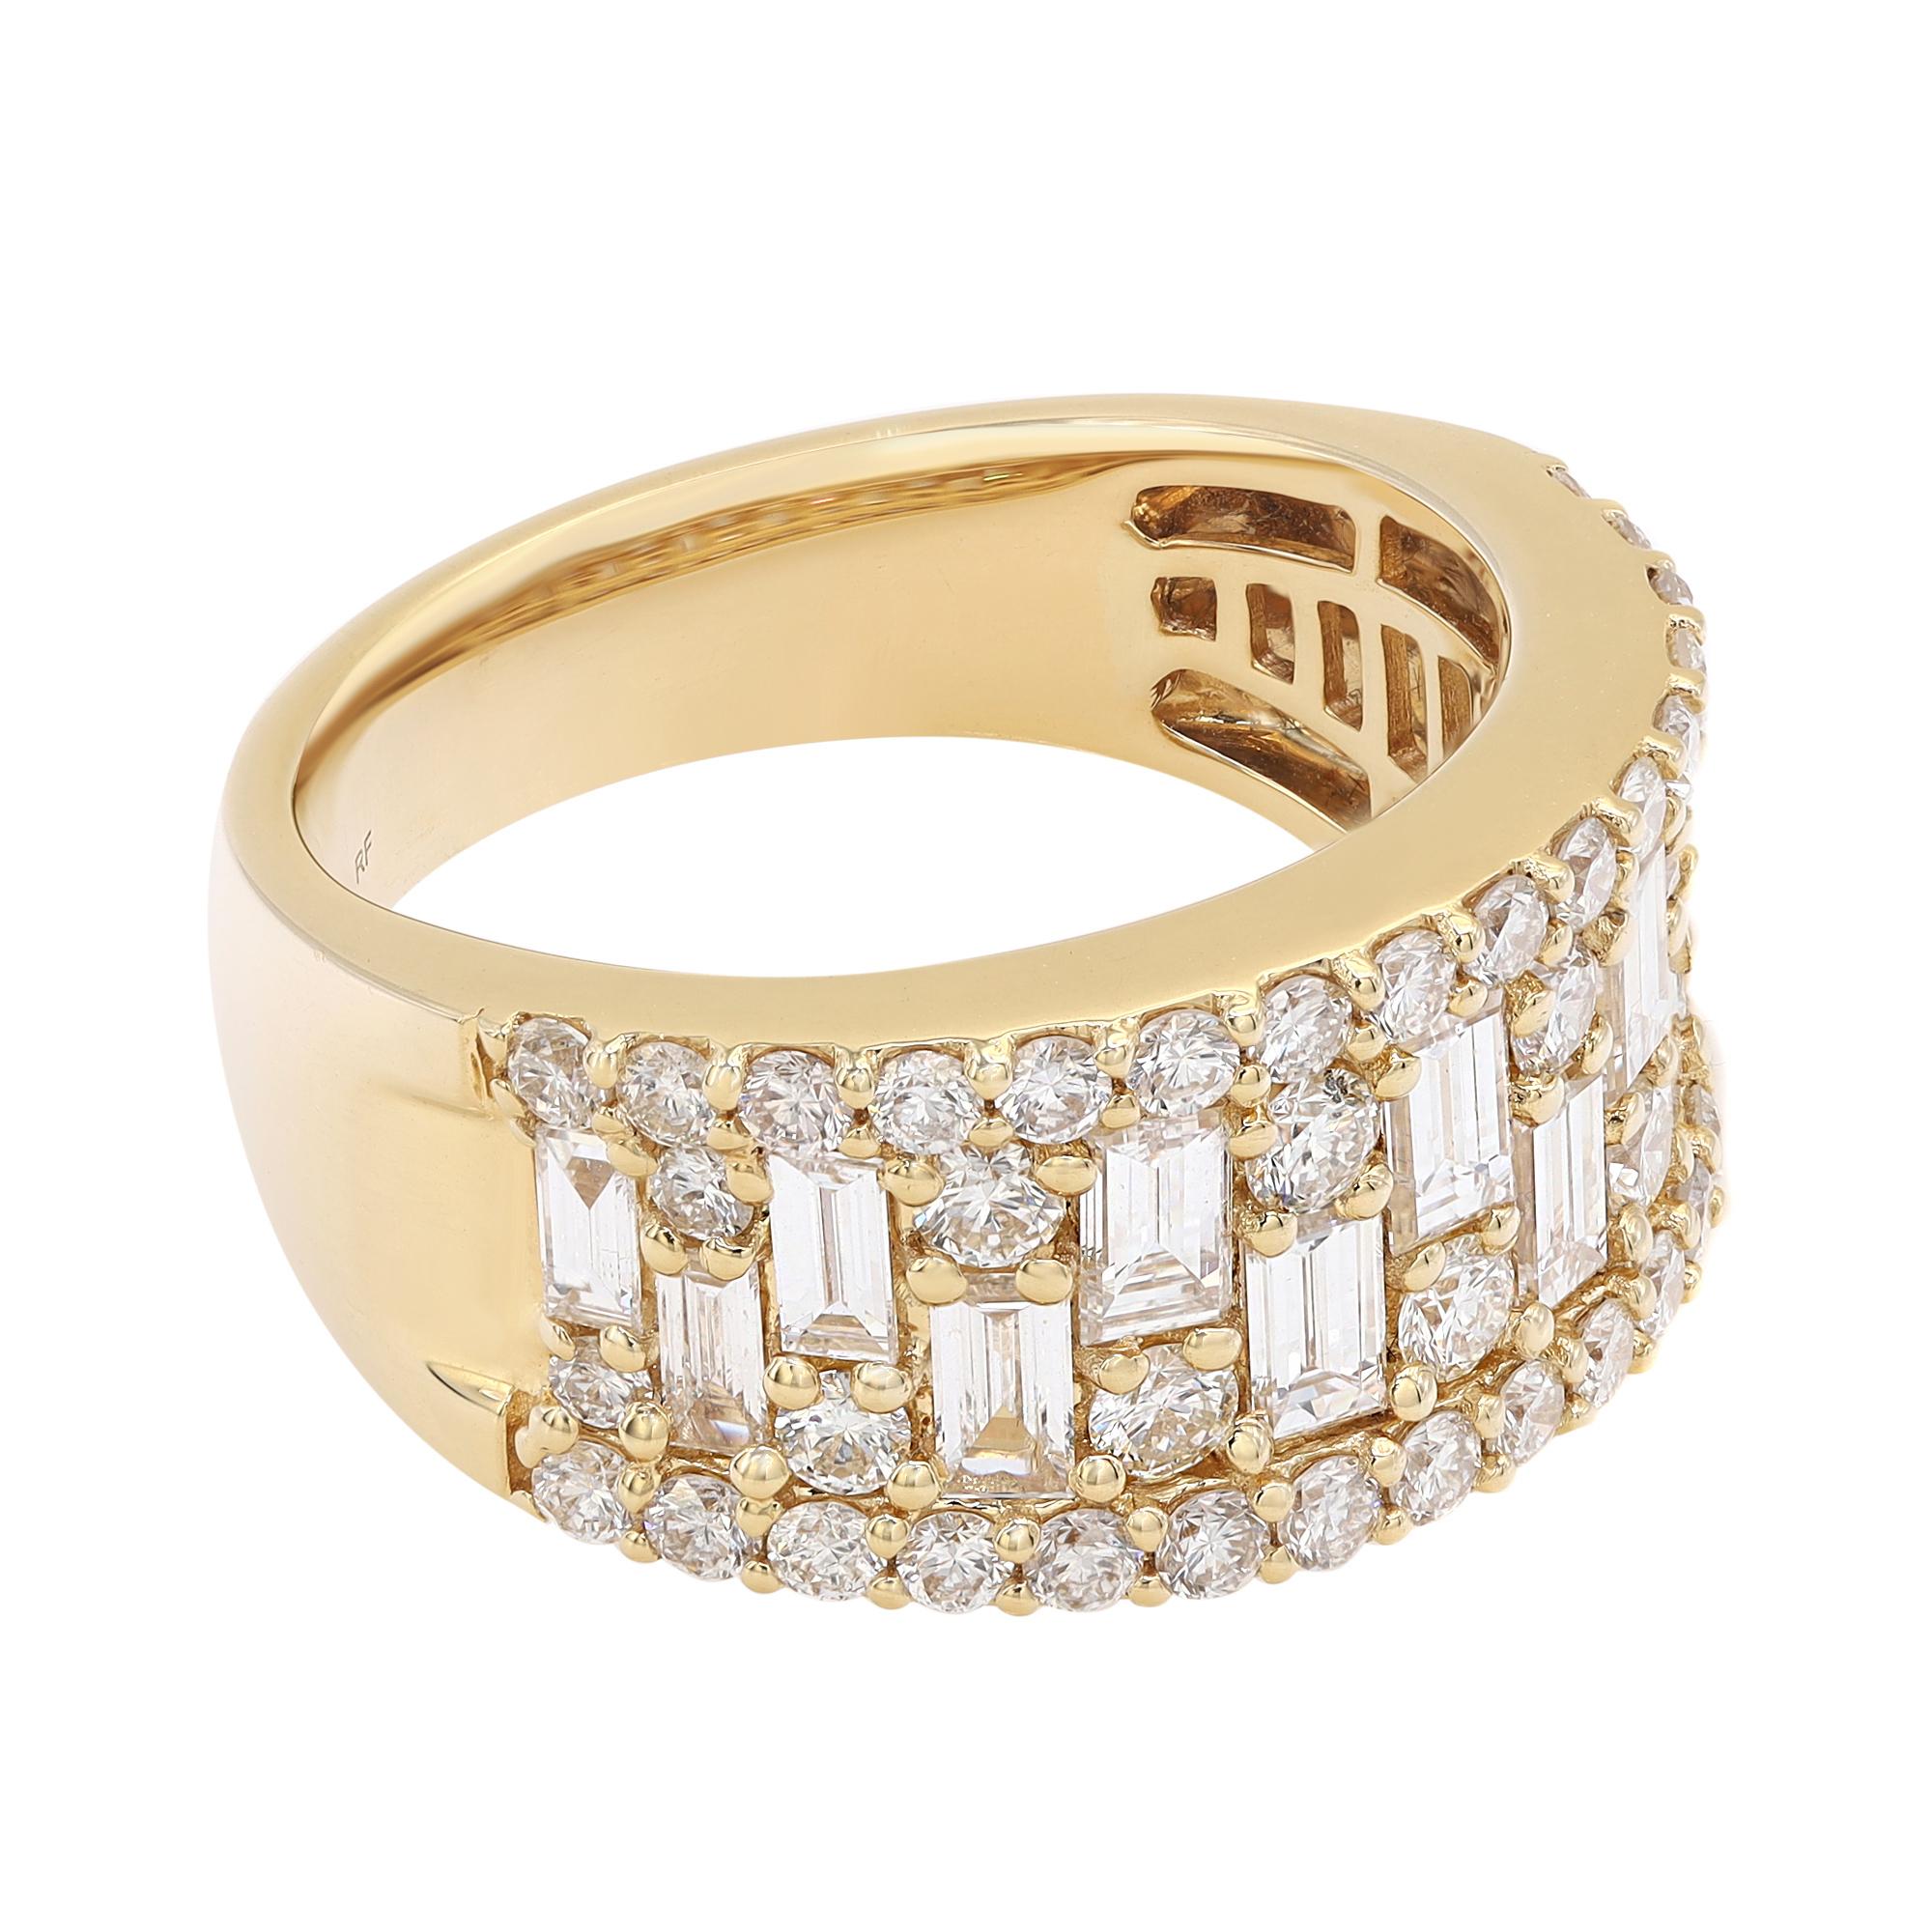 Modern ladies thick band ring crafted in 18k yellow gold. This ring features baguette cut and round cut sparkling diamonds encrusted in prong setting. Total diamond weight: 2.11 carats. Diamond quality: color G-H and clarity VS-SI. Ring size: 6.75.